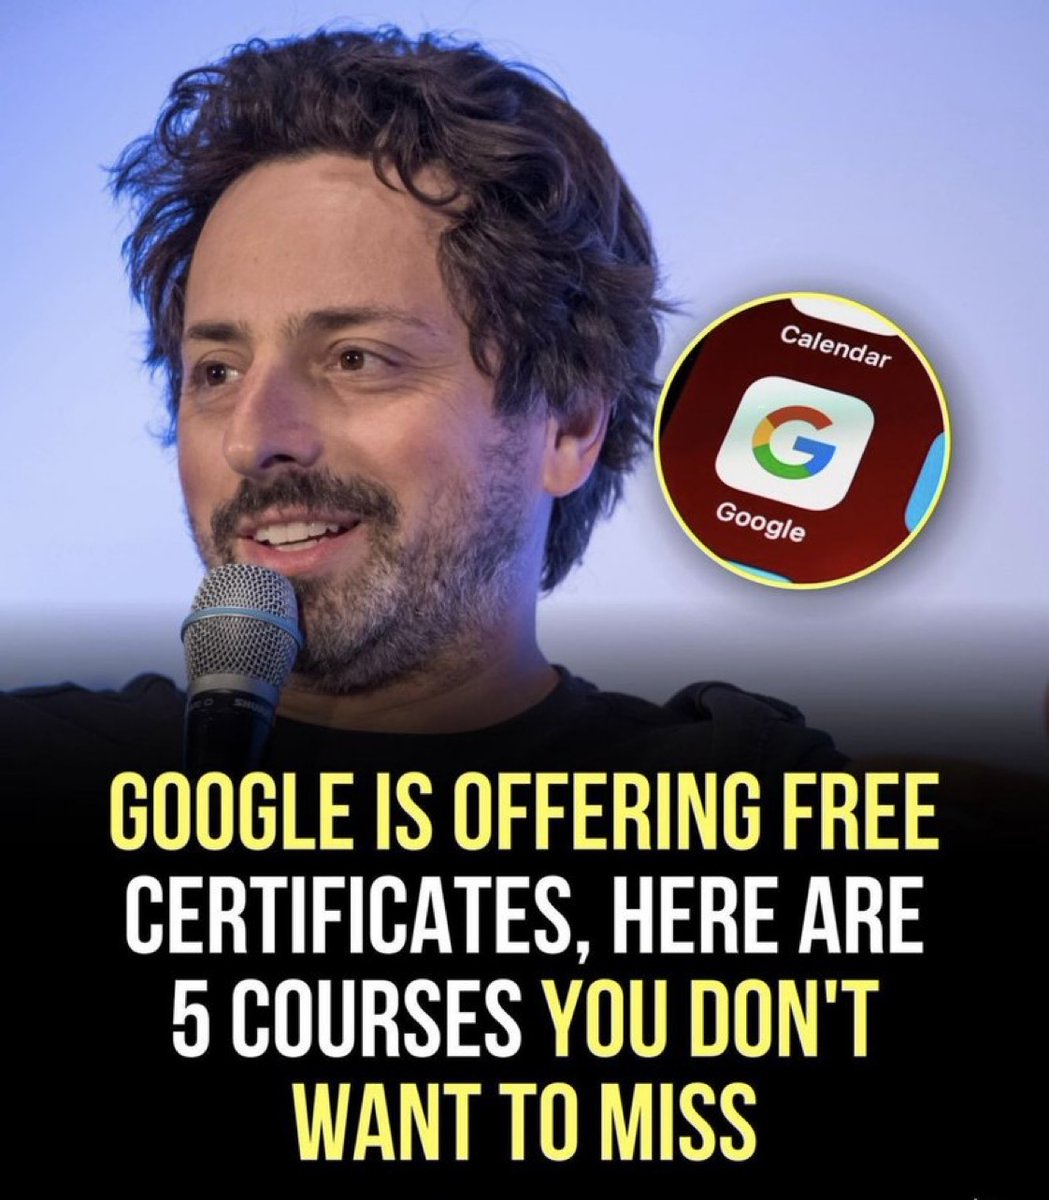 Google is giving YOU all the tools to make your first $1,000,000. 5 courses you wouldn’t want to miss: